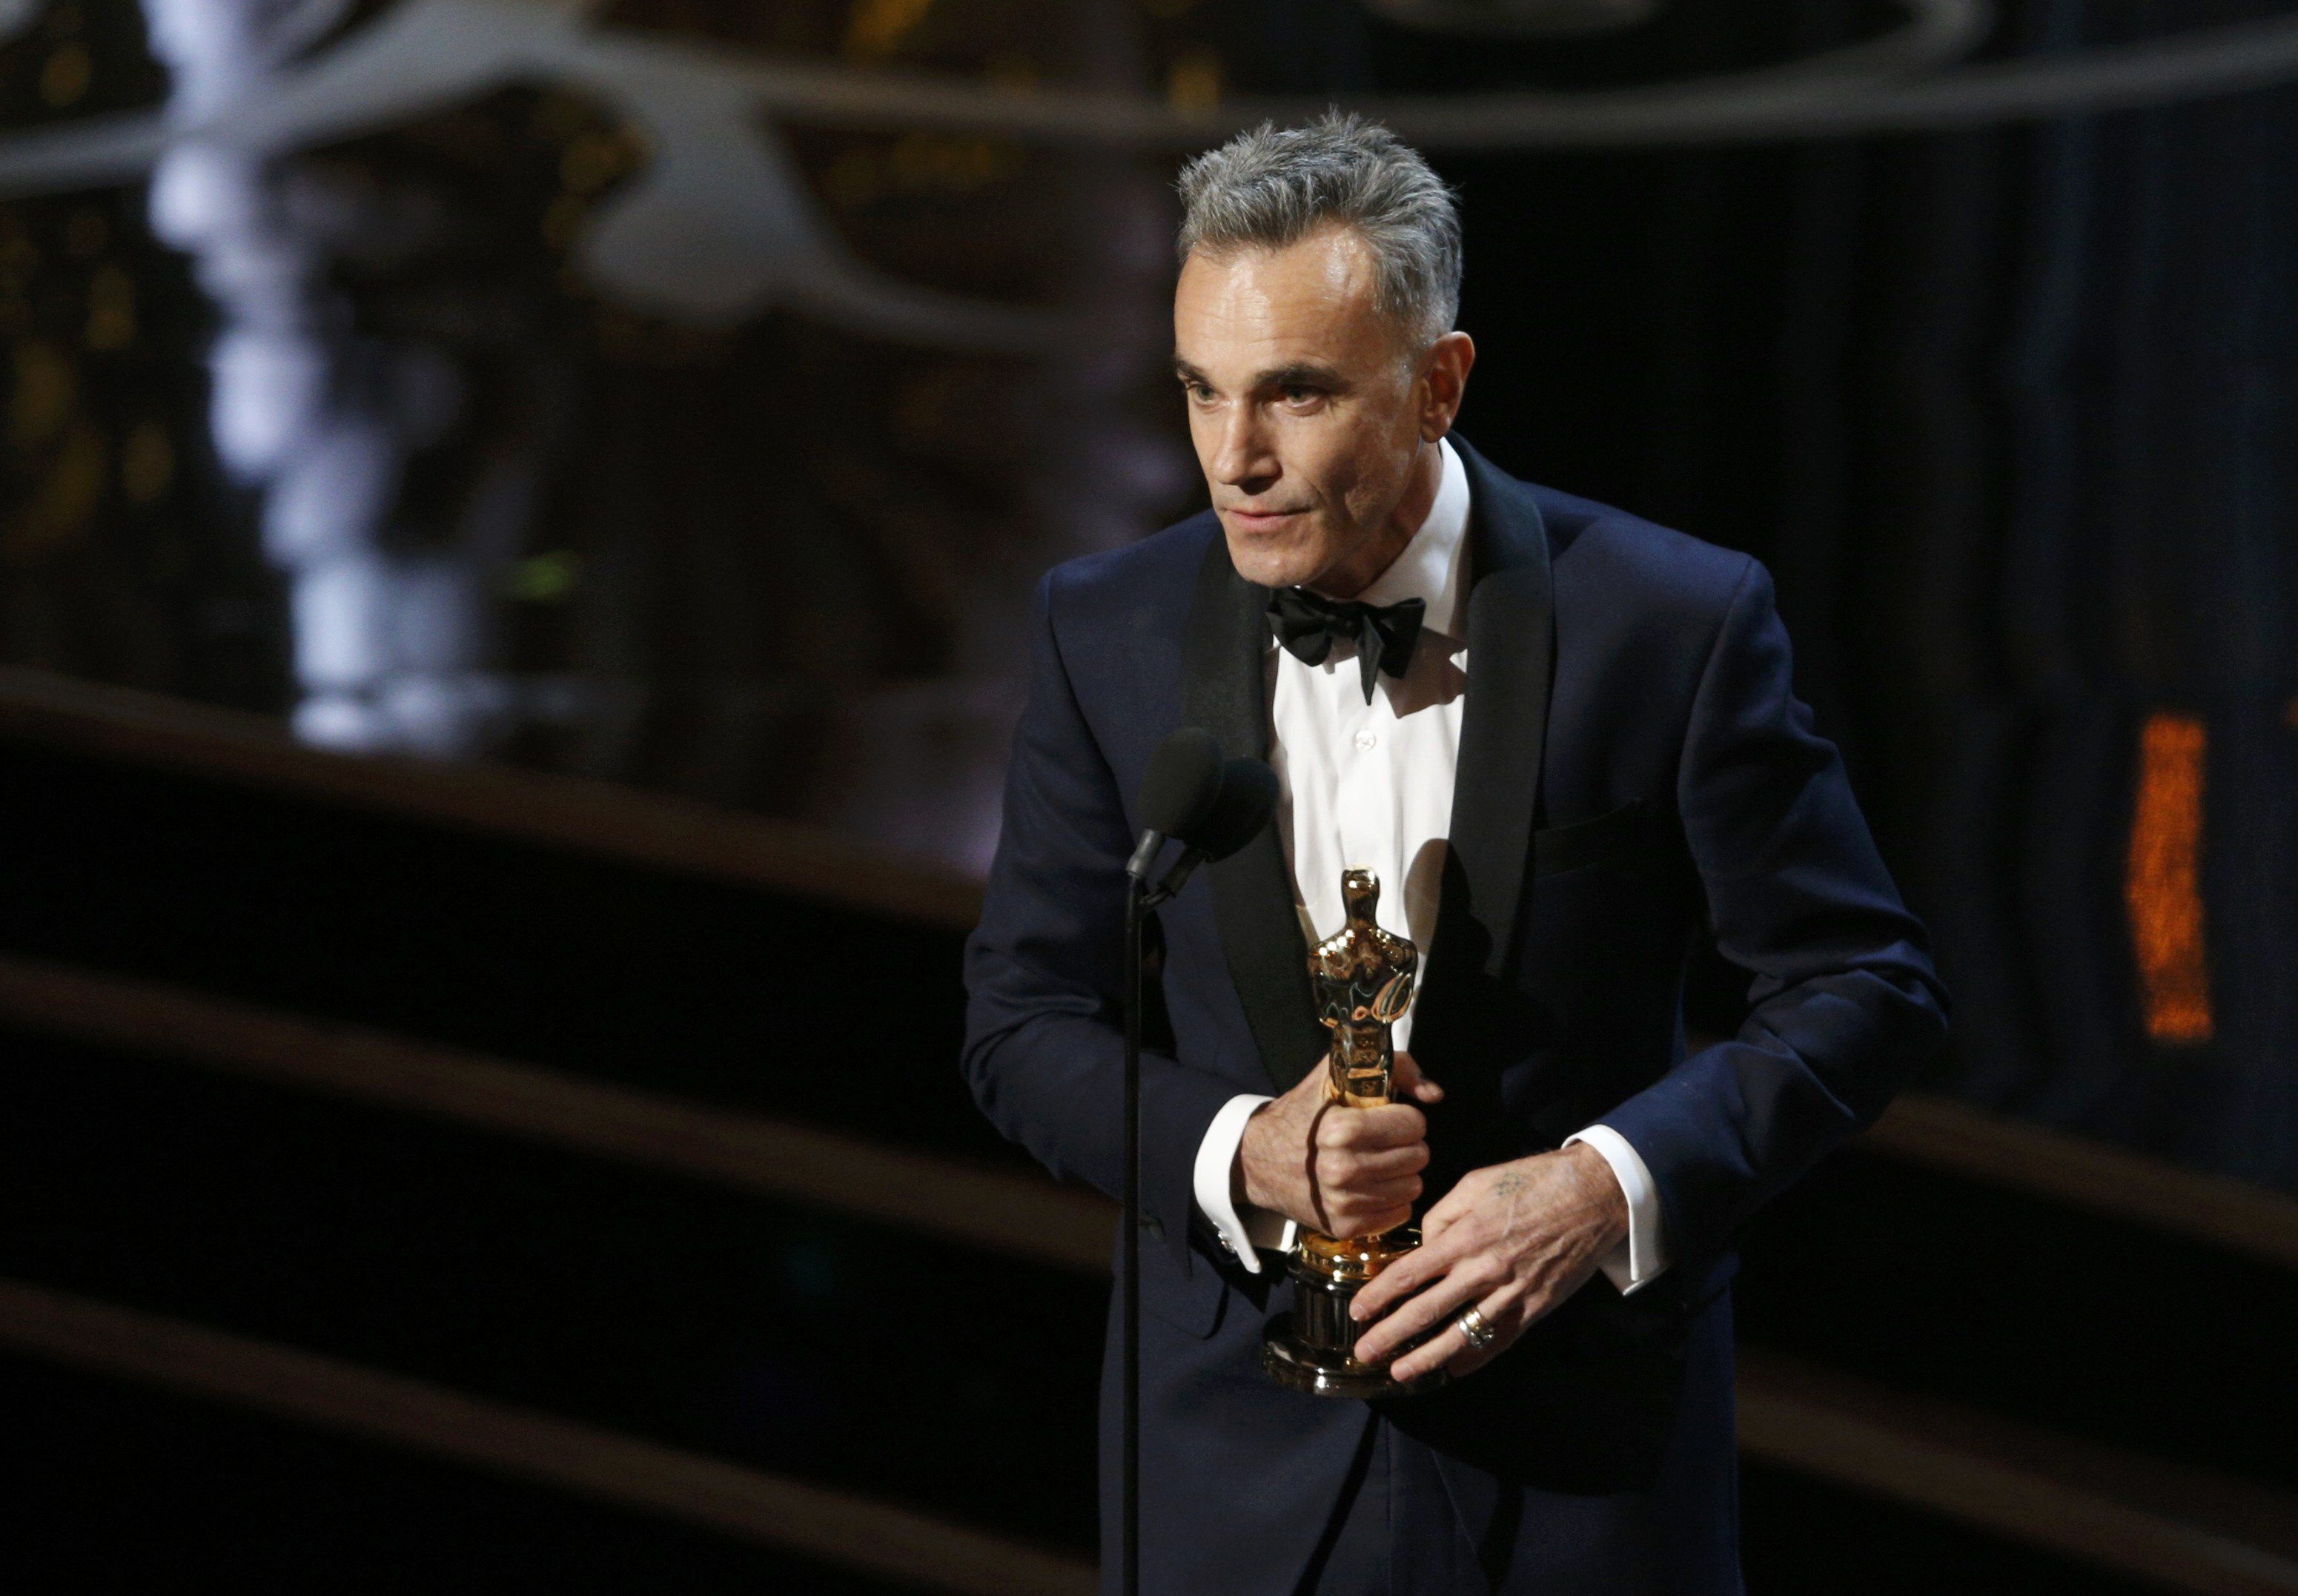 Daniel Day-Lewis, Top wallpapers, Hollywood legend, Iconic performances, 3100x2160 HD Desktop